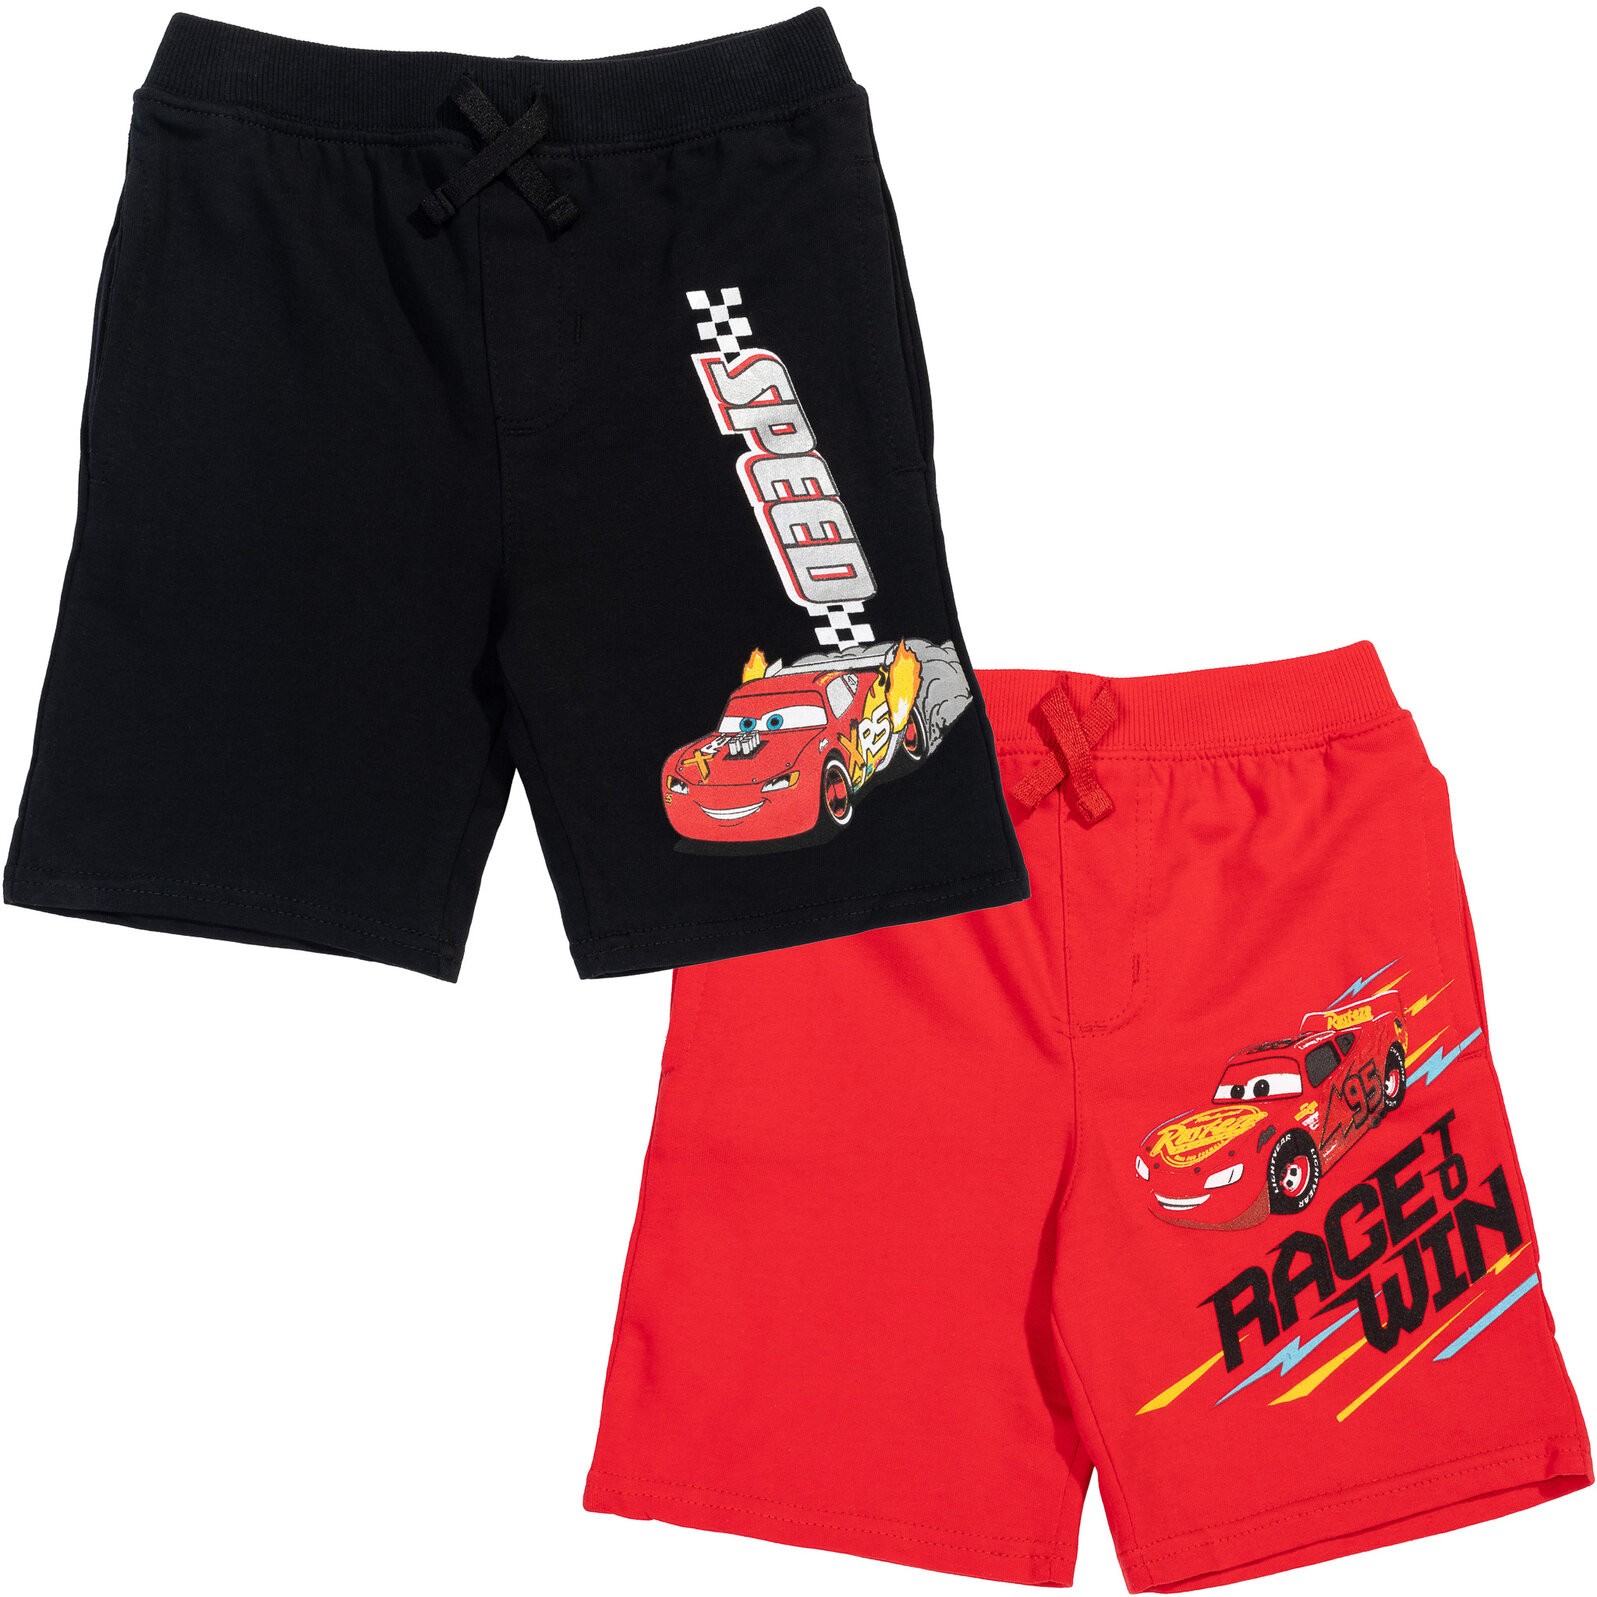 Disney Pixar Cars Lightning McQueen Toddler Boys French Terry 2 Pack Shorts Toddler to Little Kid - image 1 of 5